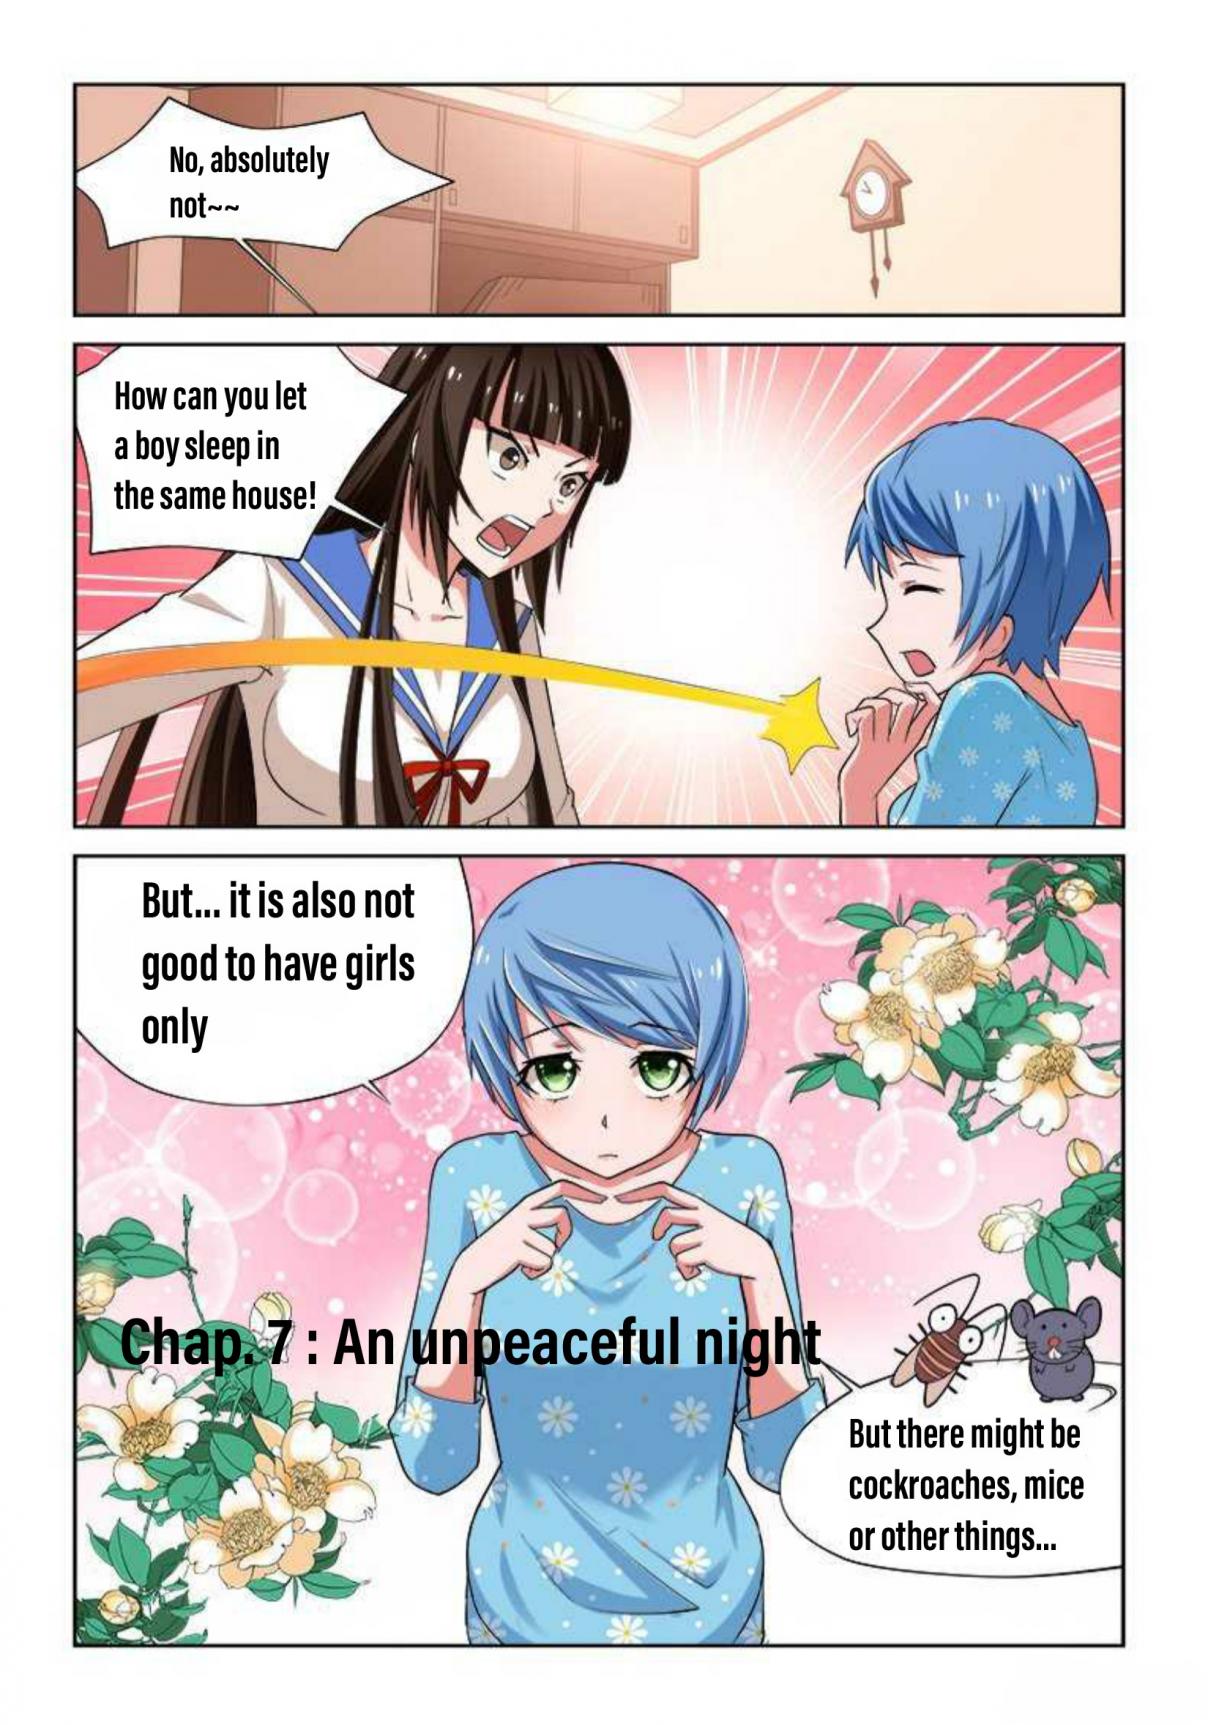 I Don't Want to Be Bullied By Girls Ch. 7 An Unpeaceful Night